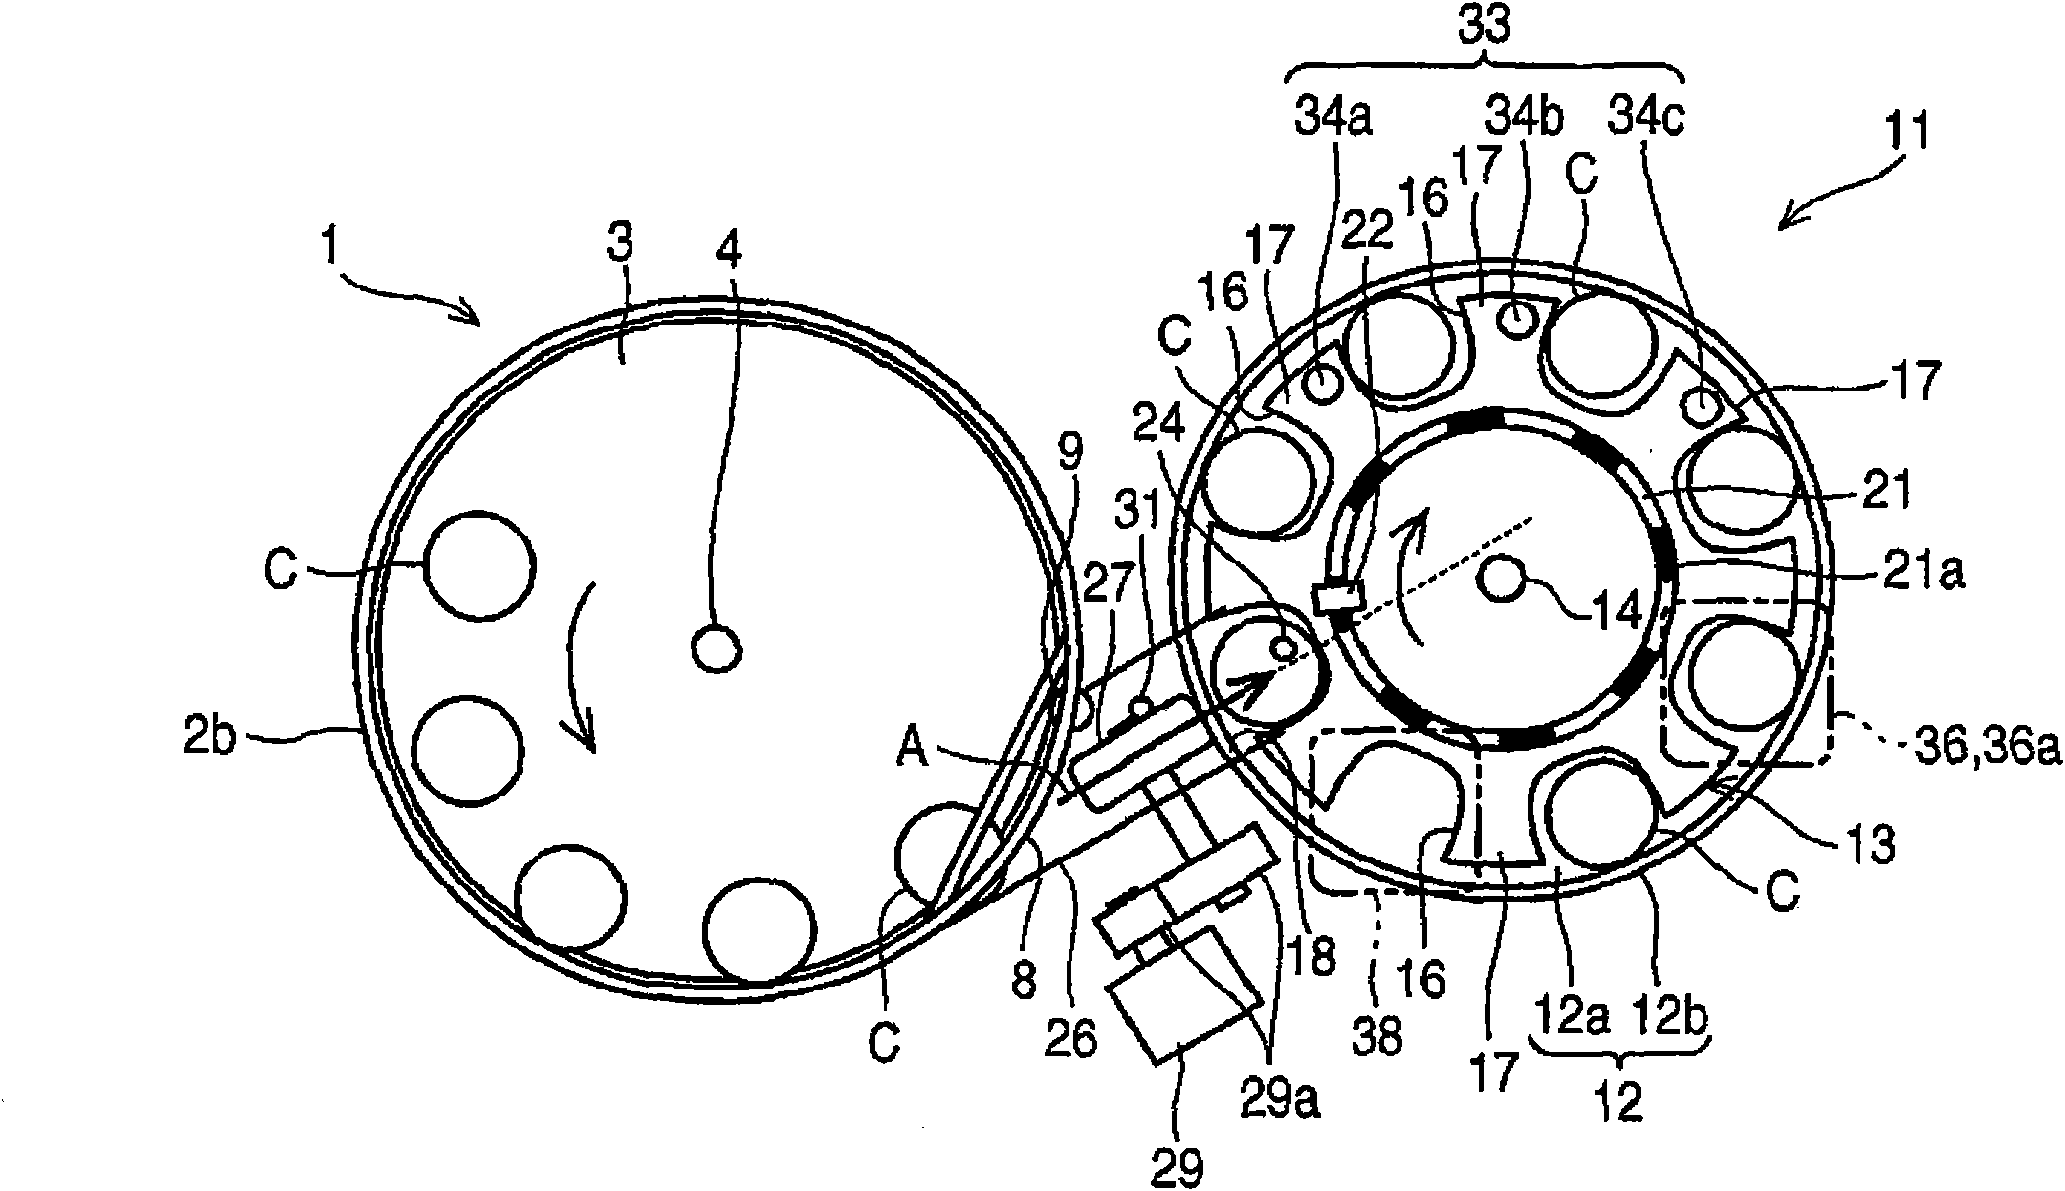 Coin processing device